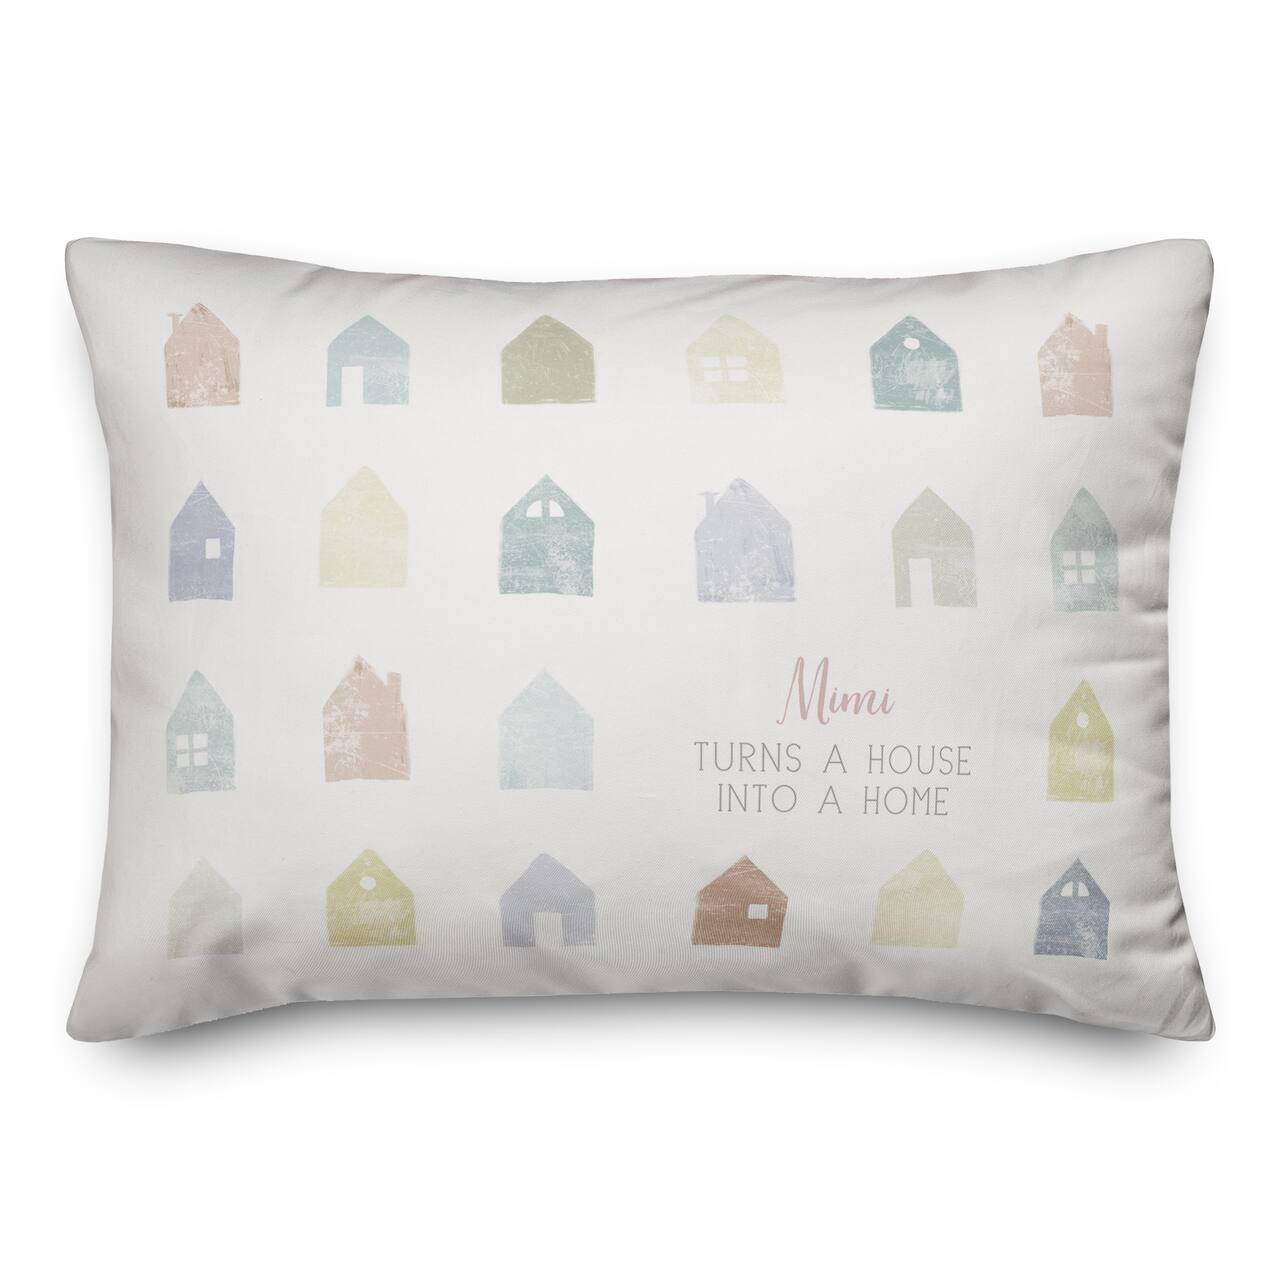 Mimi Turns a House into Home Throw Pillow